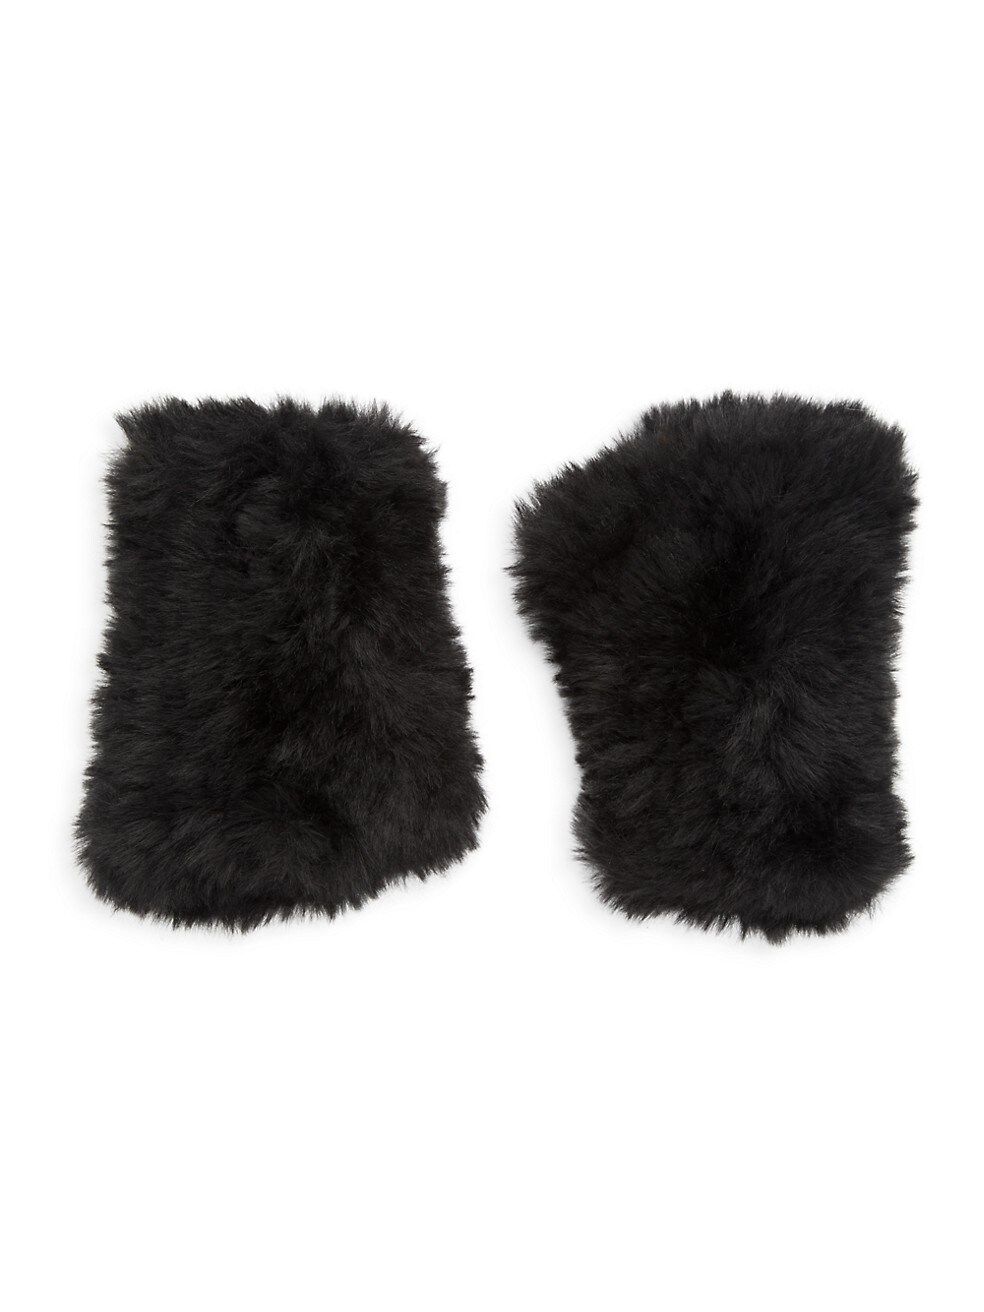 Surell Faux Fur Stretch Knit Fingerless Texting Mittens | Saks Fifth Avenue